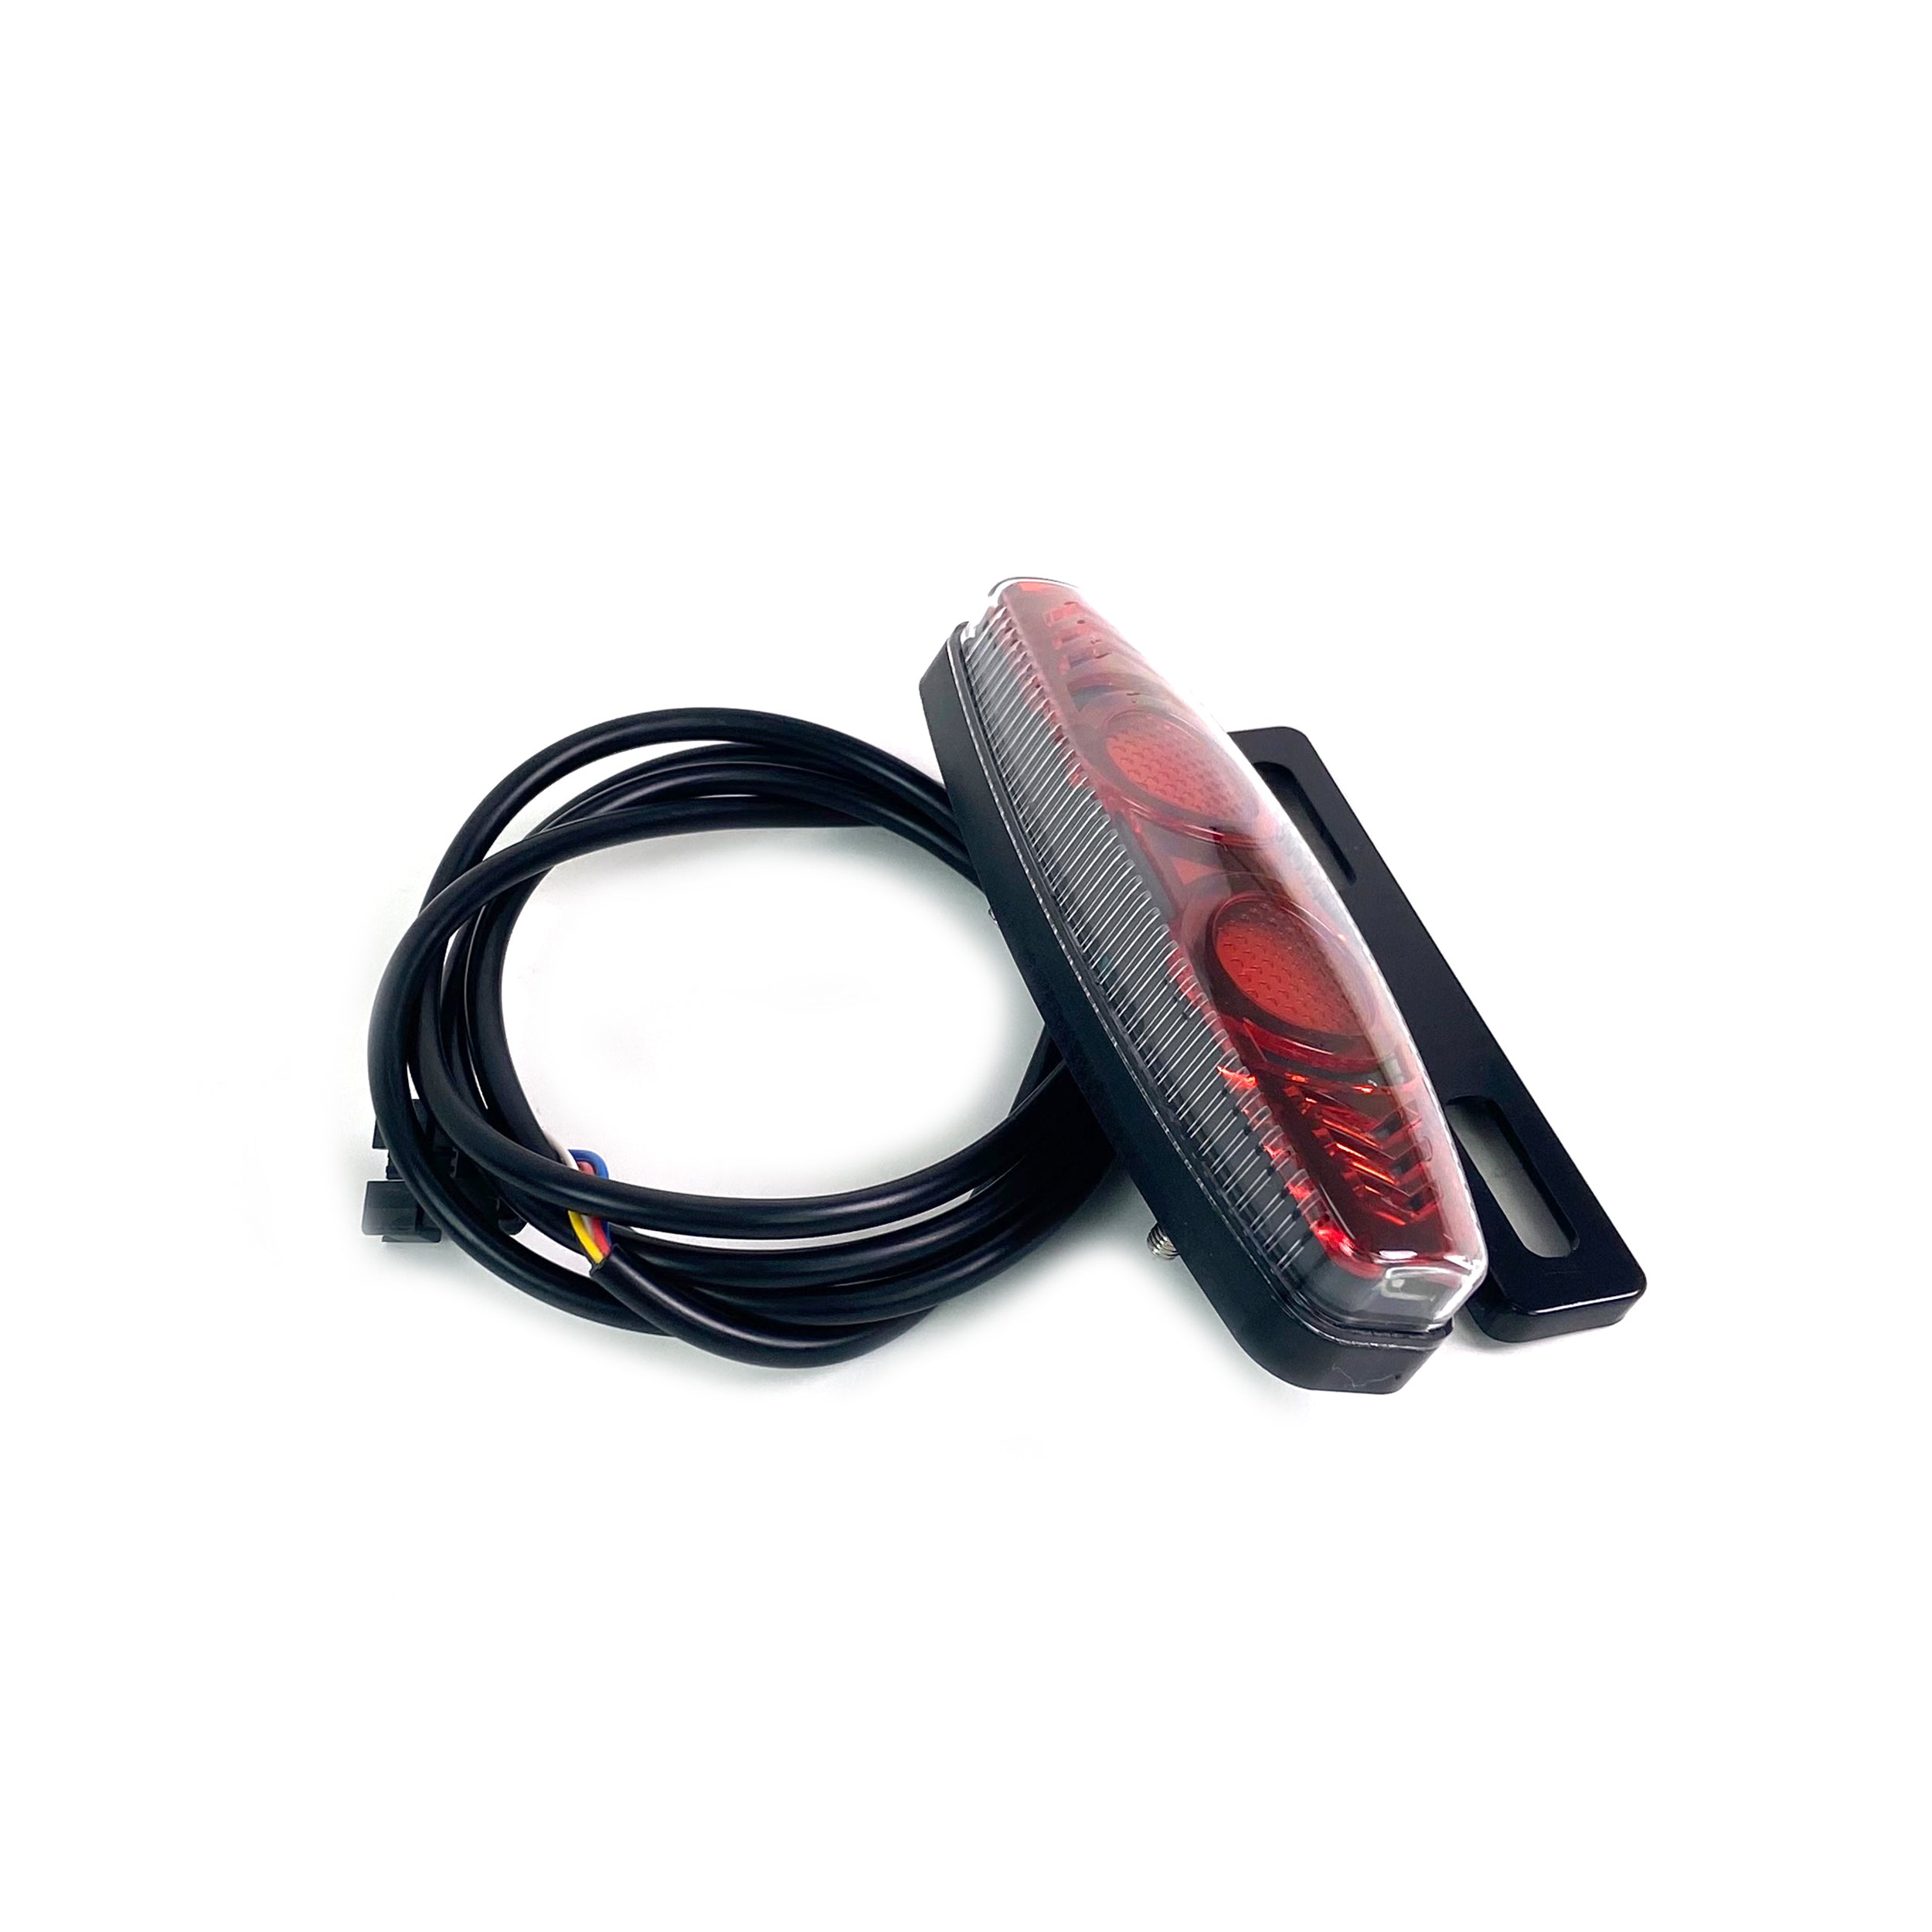 TAILLIGHT FOR COSWHEEL EBIKE